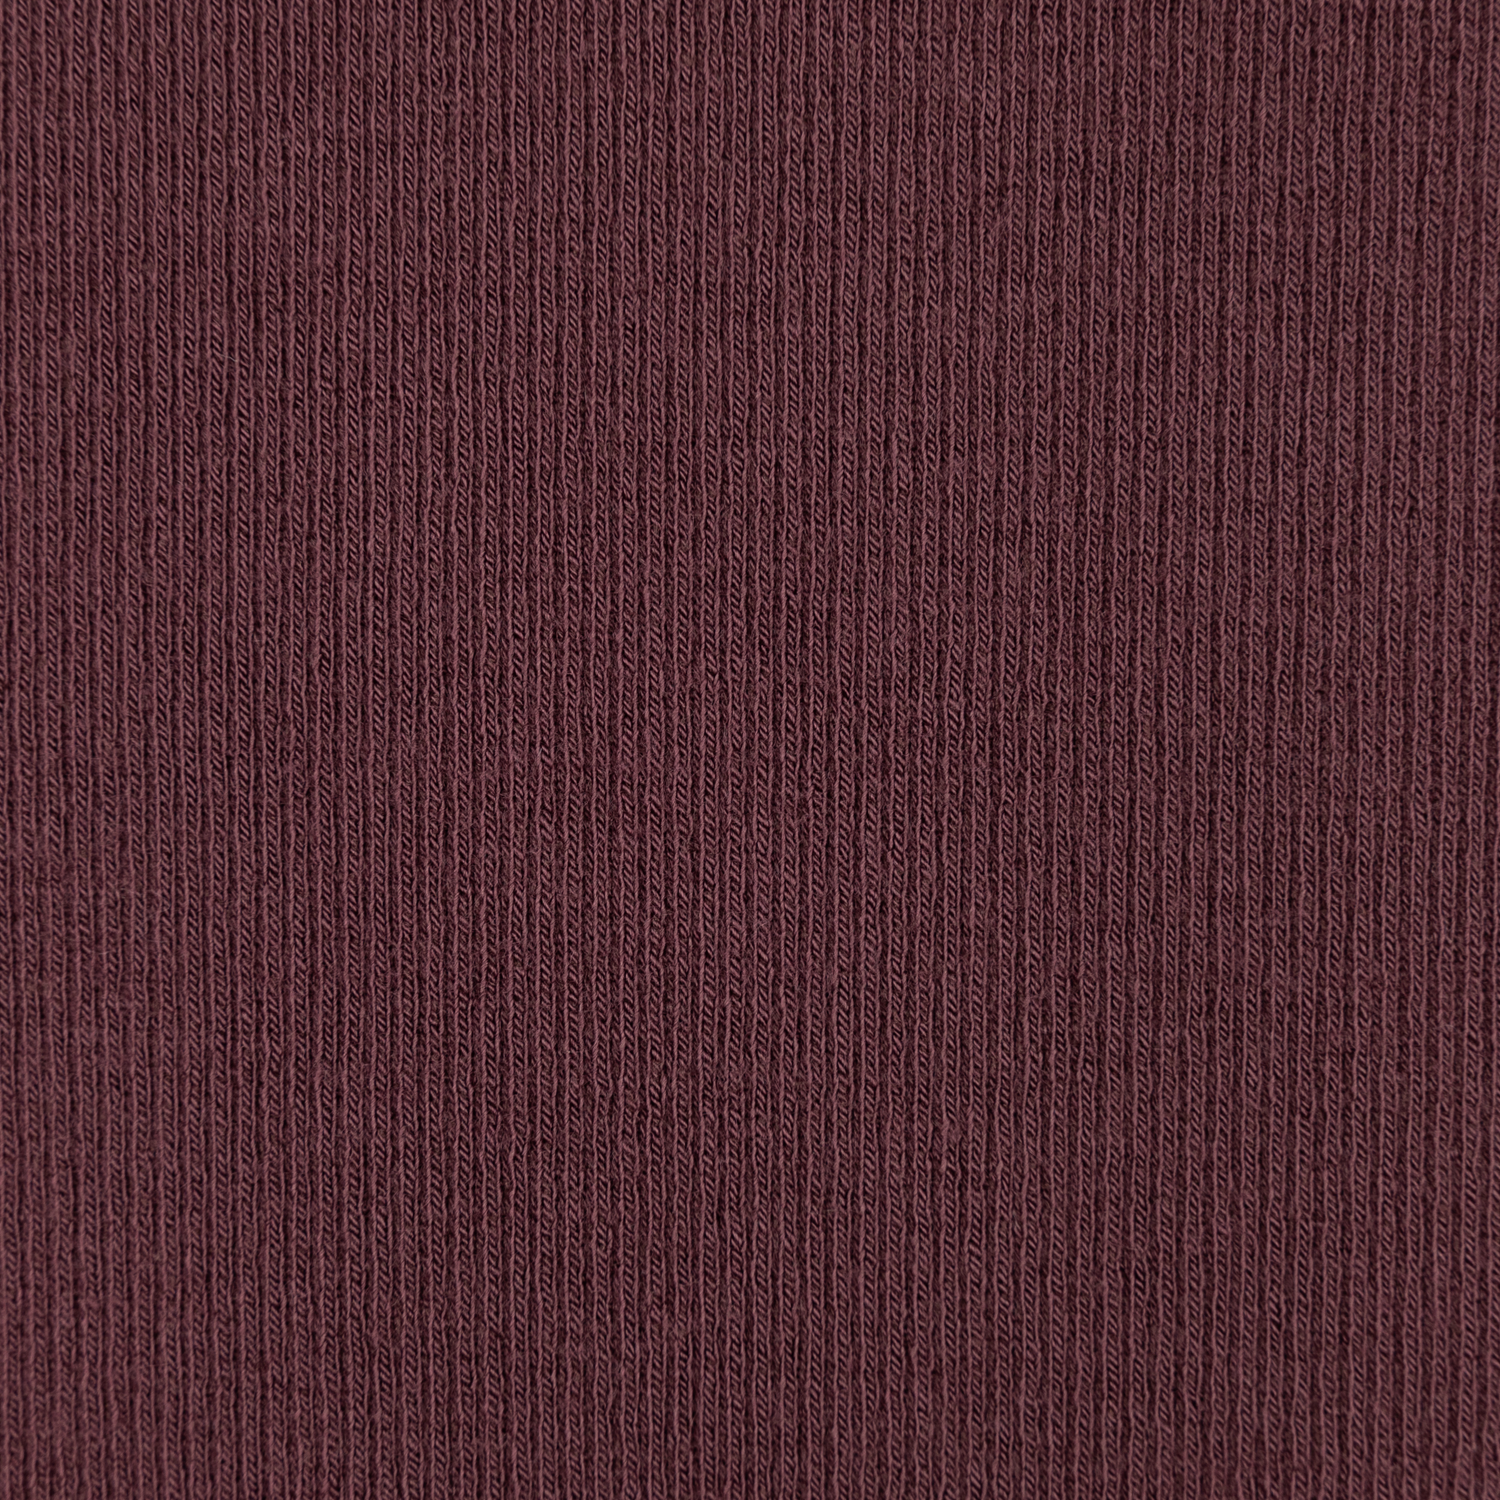 Maroon High Neck Ribbed Top